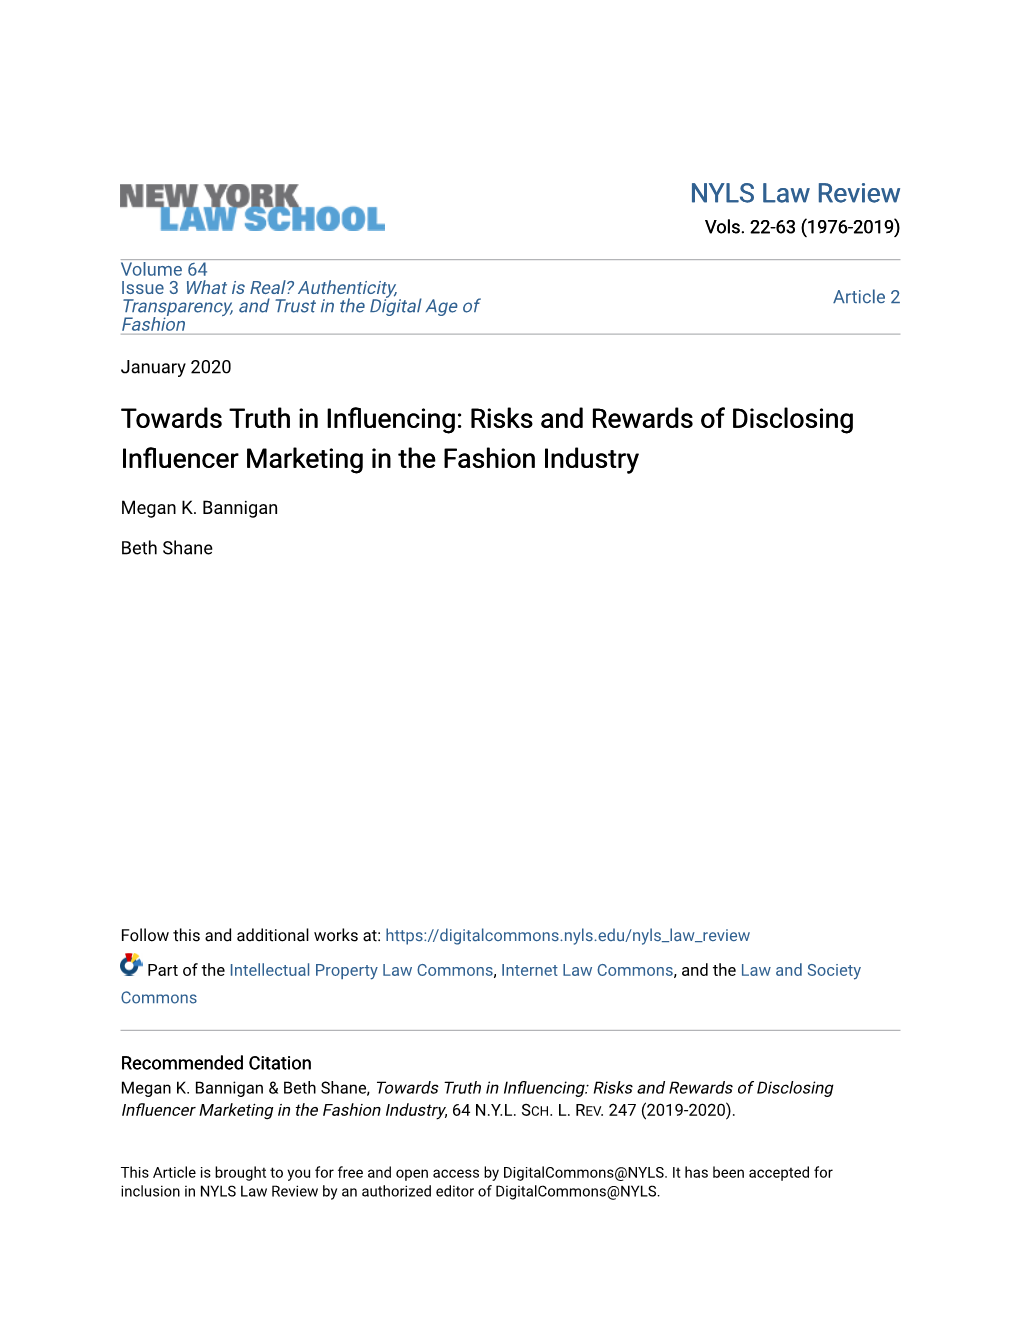 Risks and Rewards of Disclosing Influencer Marketing in the Fashion Industry